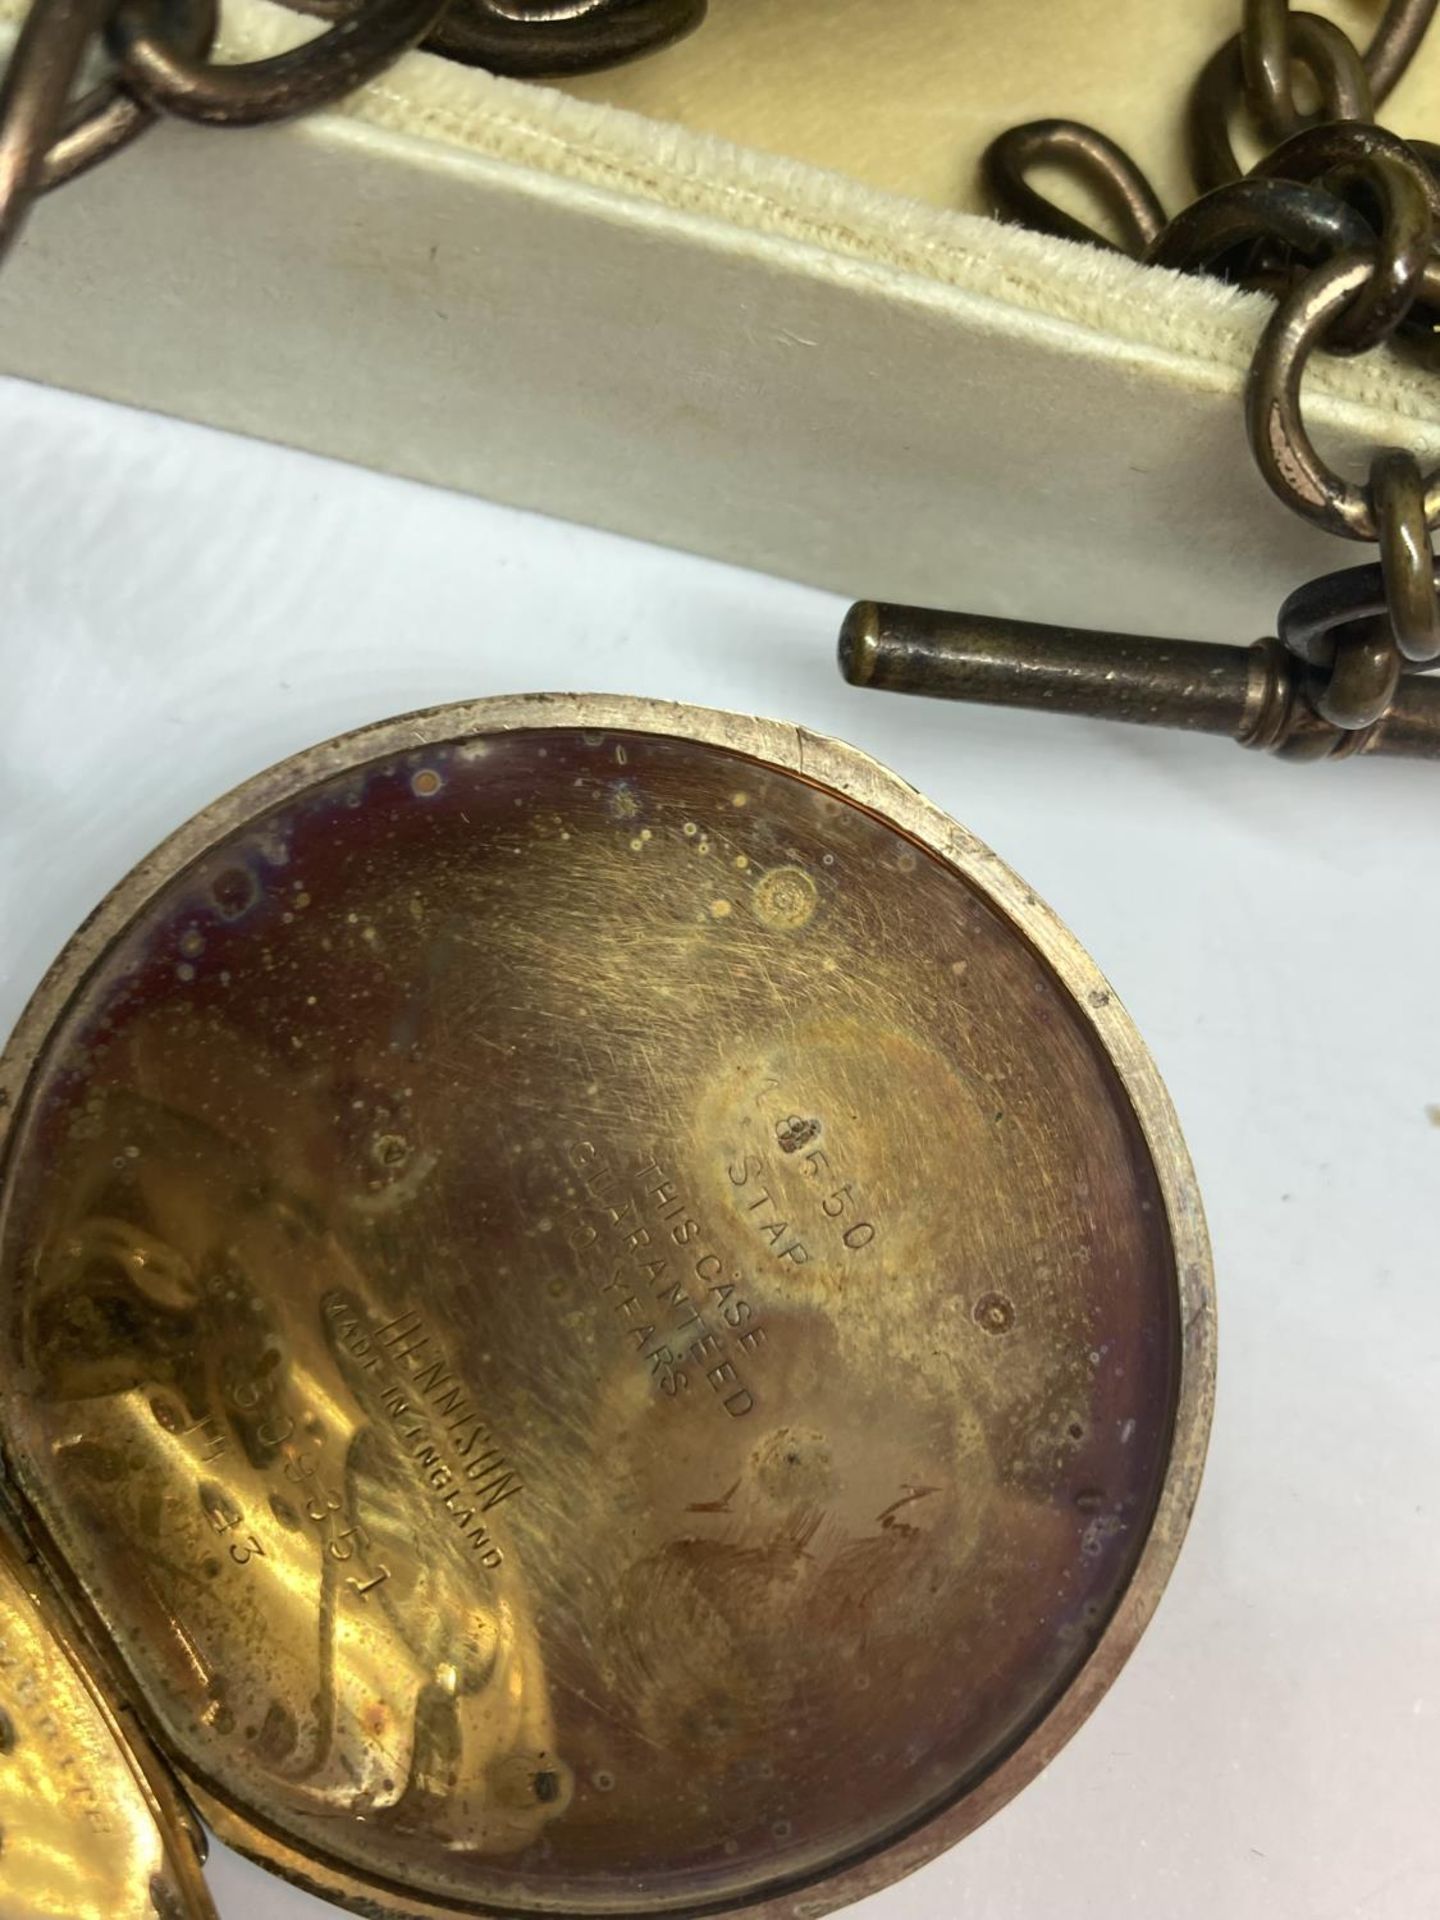 VARIOUS ITEMS TO INCLUDE A GOLD PLATED POCKET WATCH WITH CHAIN, A WHITE METAL POSSIBLY SILVER BROOCH - Image 6 of 6